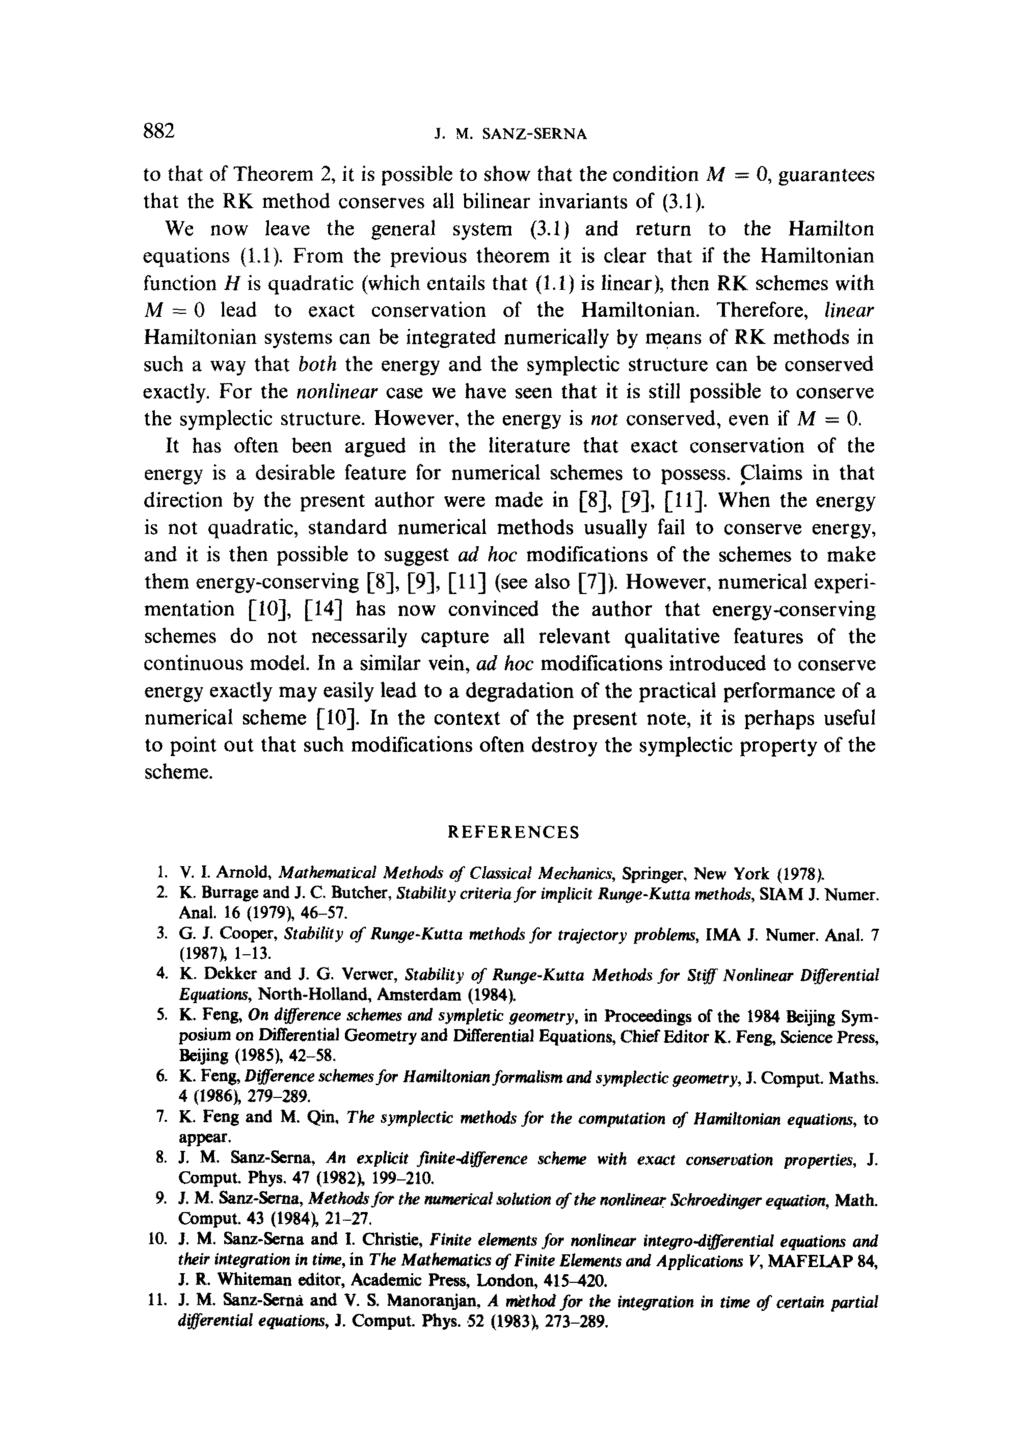 882 J.M. SANZ-SERNA to that of Theorem 2, it is possible to show that the condition M = 0, guarantees that the RK method conserves all bilinear invariants of (3.1). We now leave the general system (3.